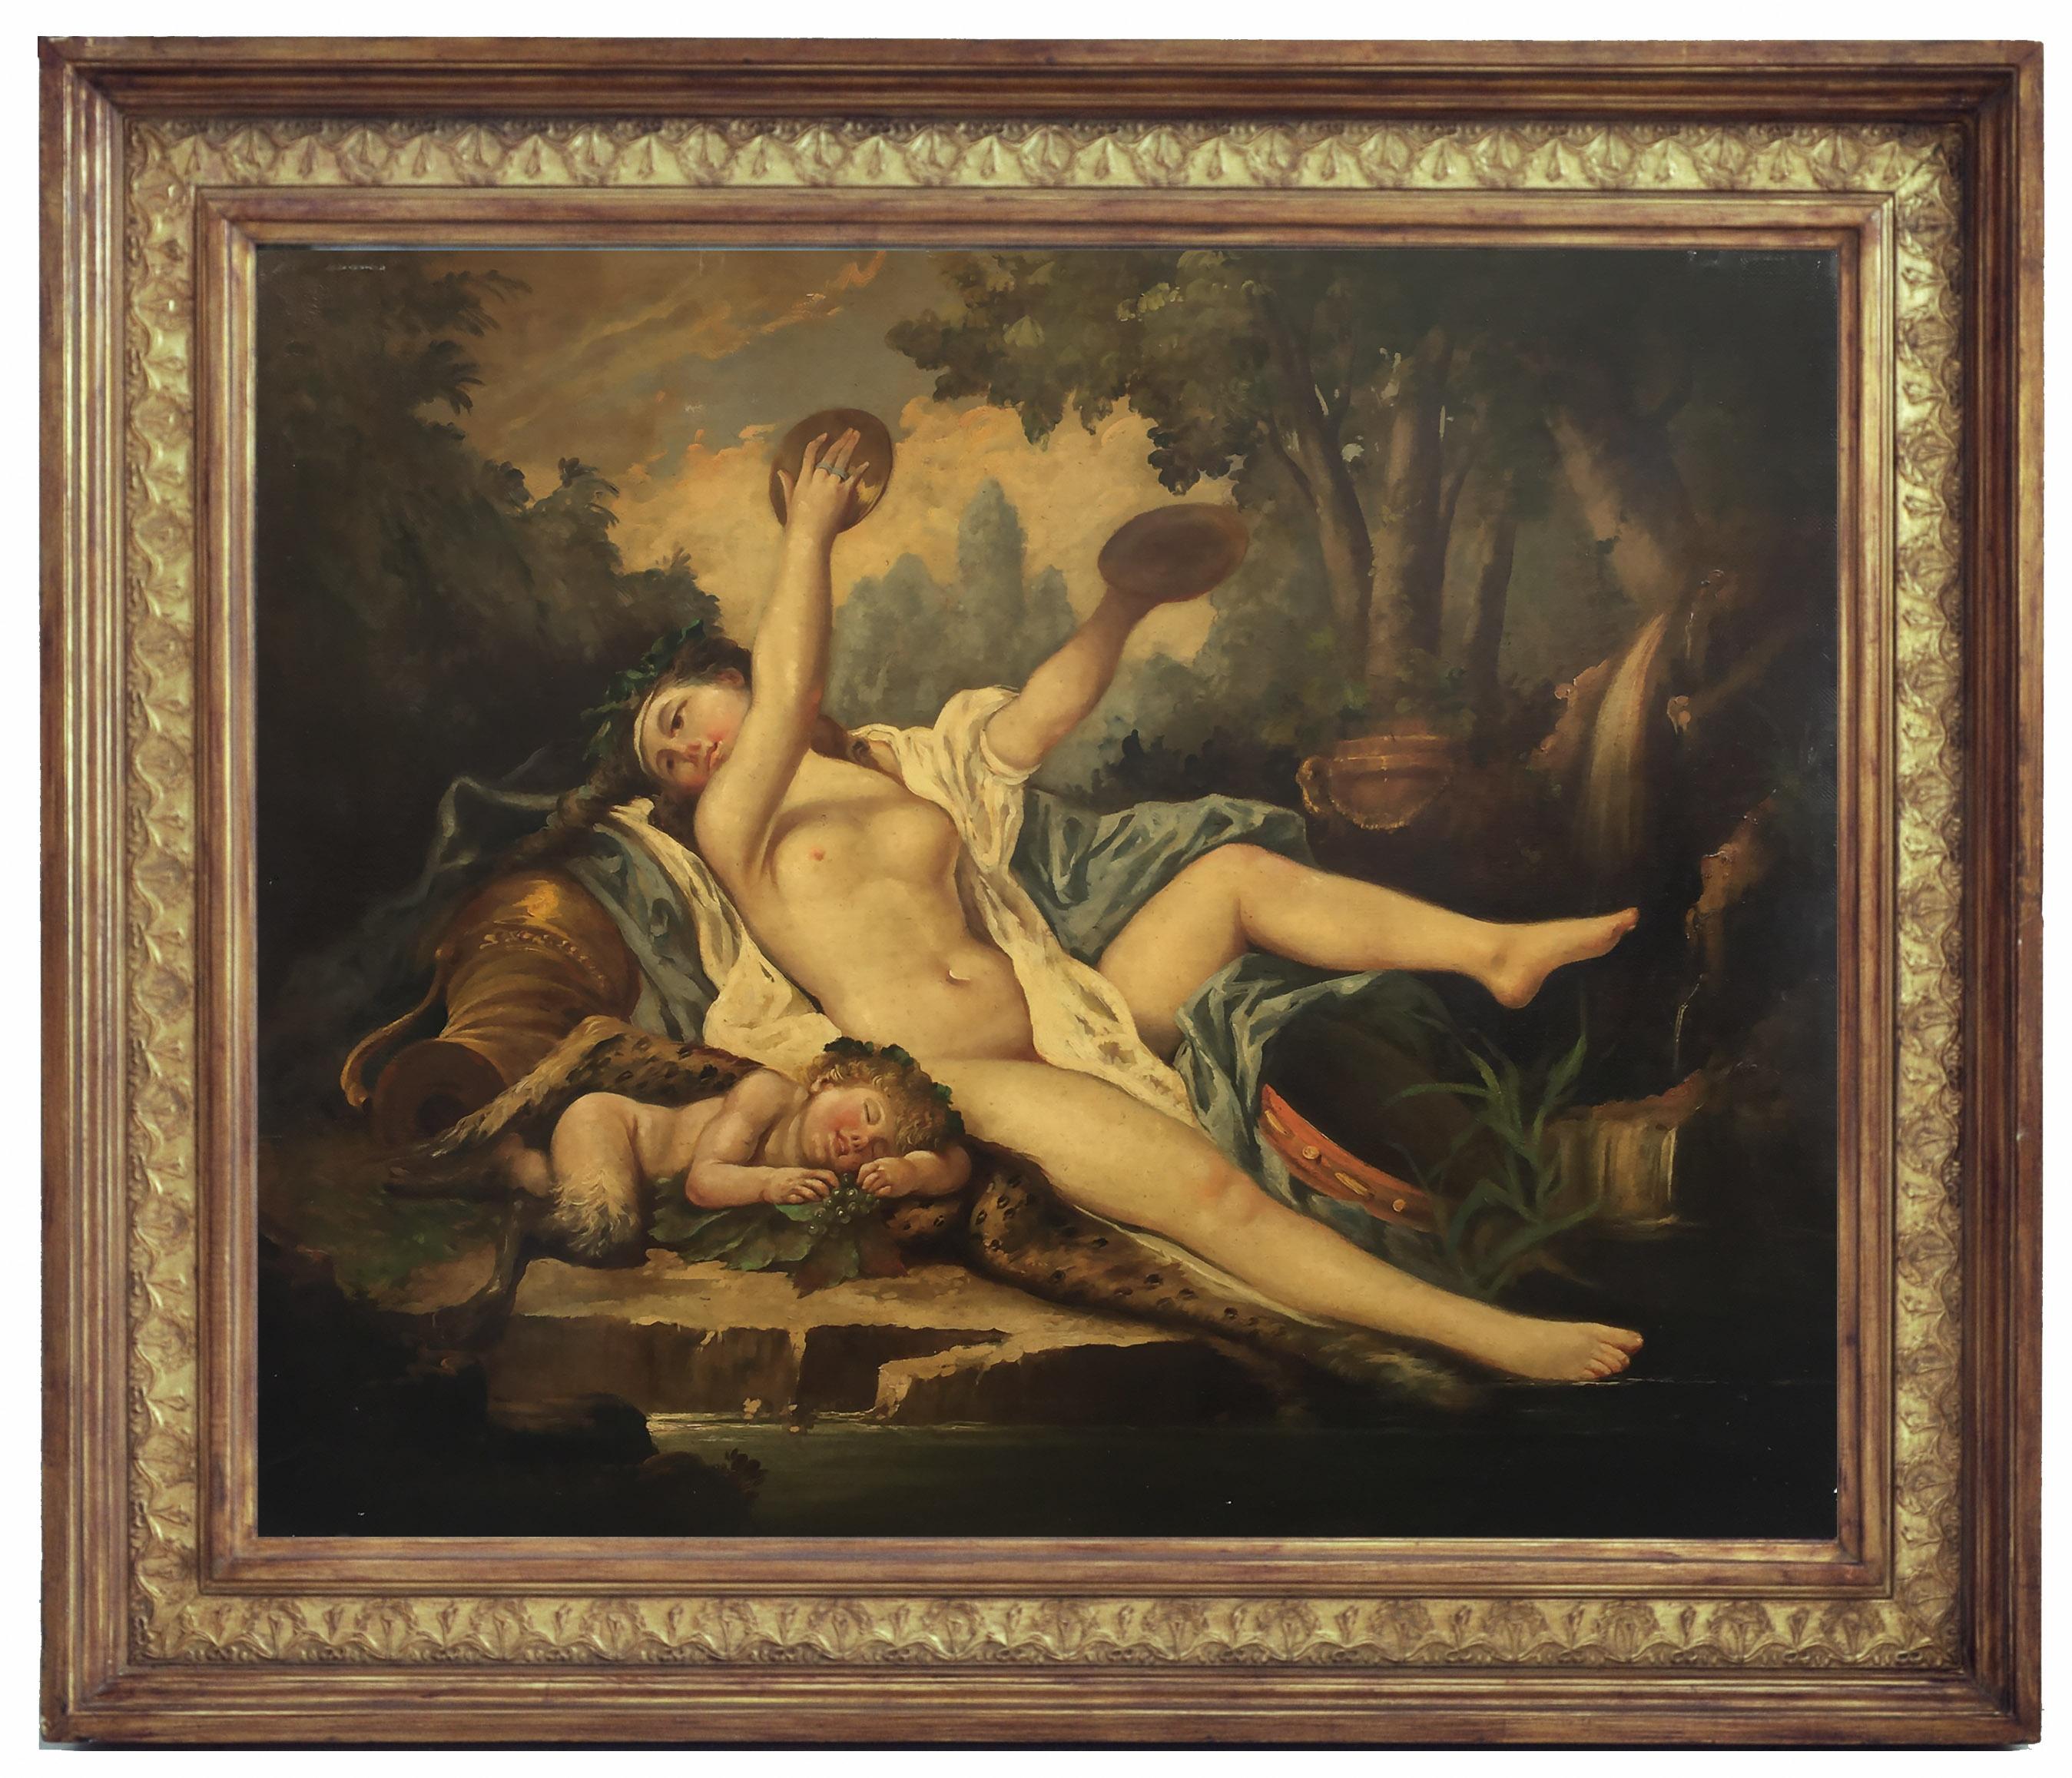 Allegorical Scene - Giovanni Faliero Italia 2009 - Oil on canvas cm. 90x110. 
Gold leaf gilded wooden frame available on request
This beautiful oil on canvas is the personal reinterpretation of the magnificent painting “Bacchant playing the Cymbals”